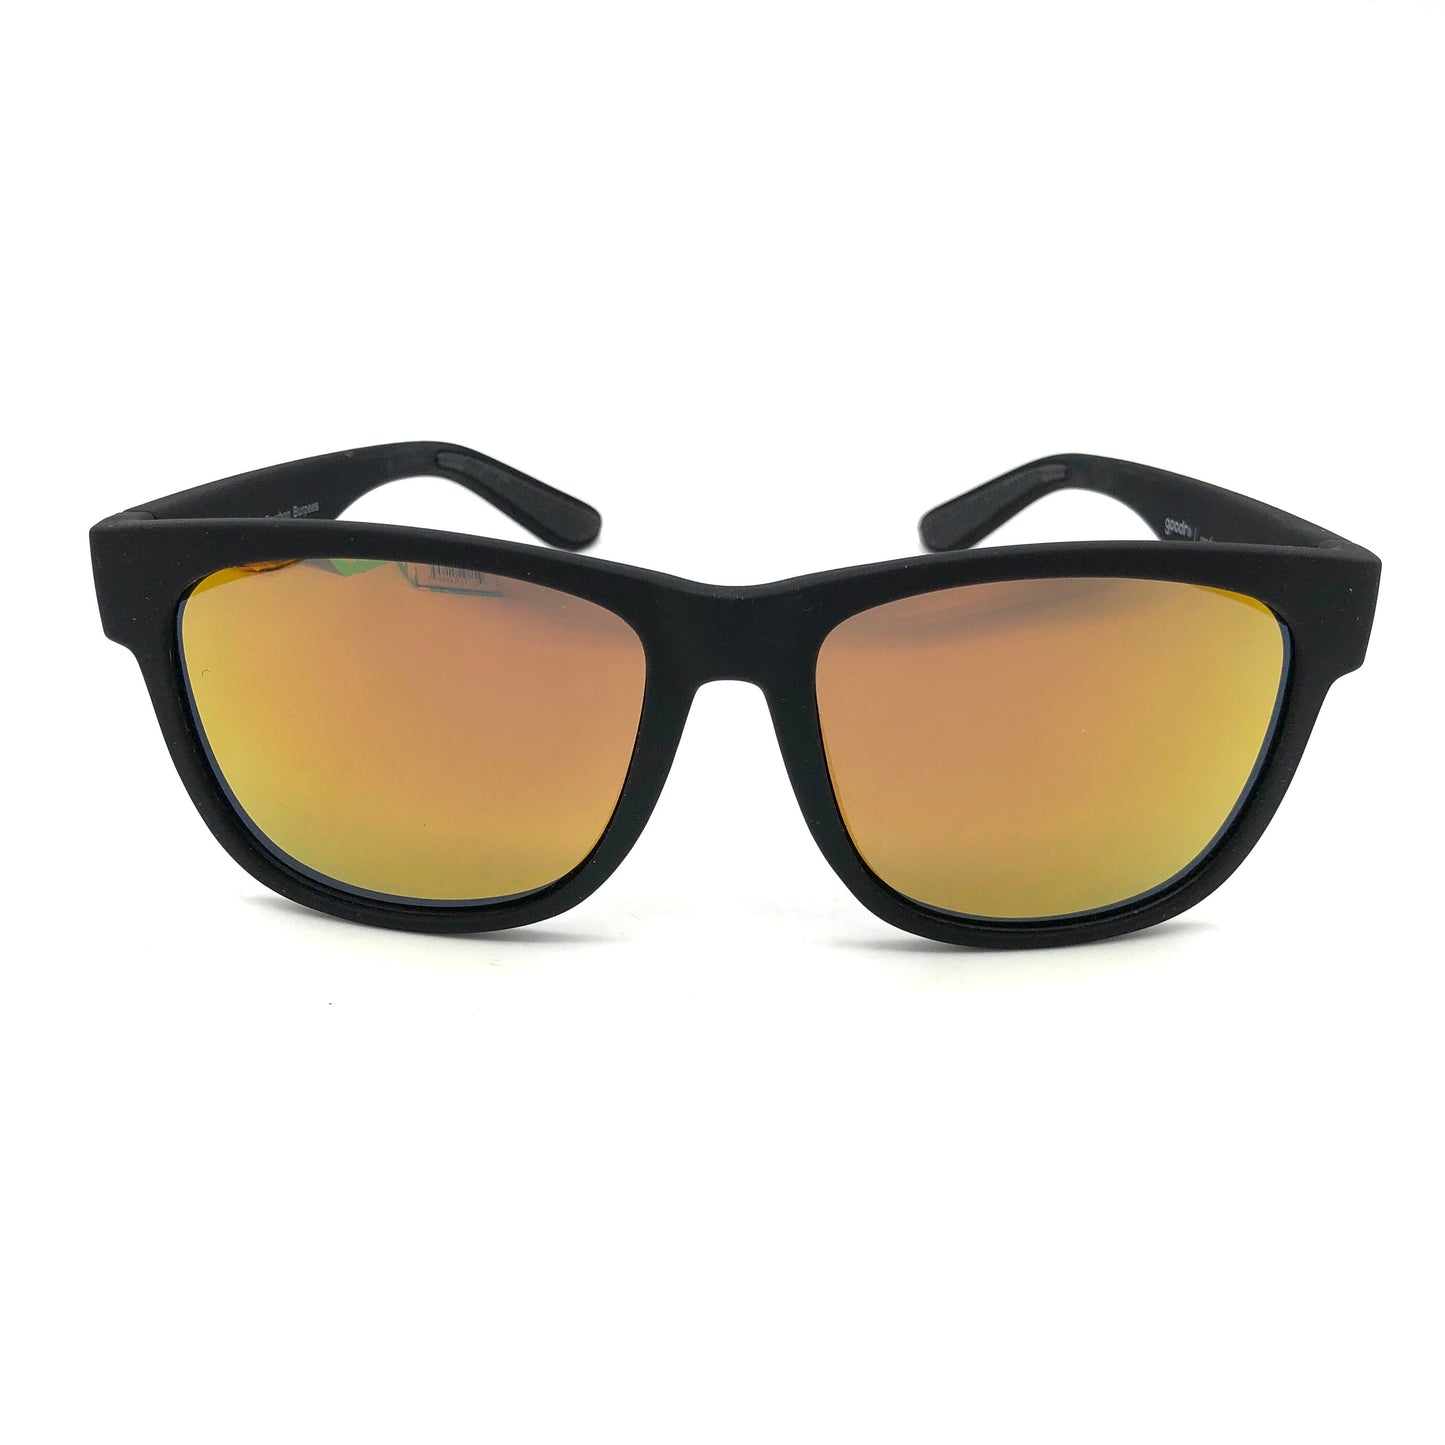 Sunglasses By GOODR